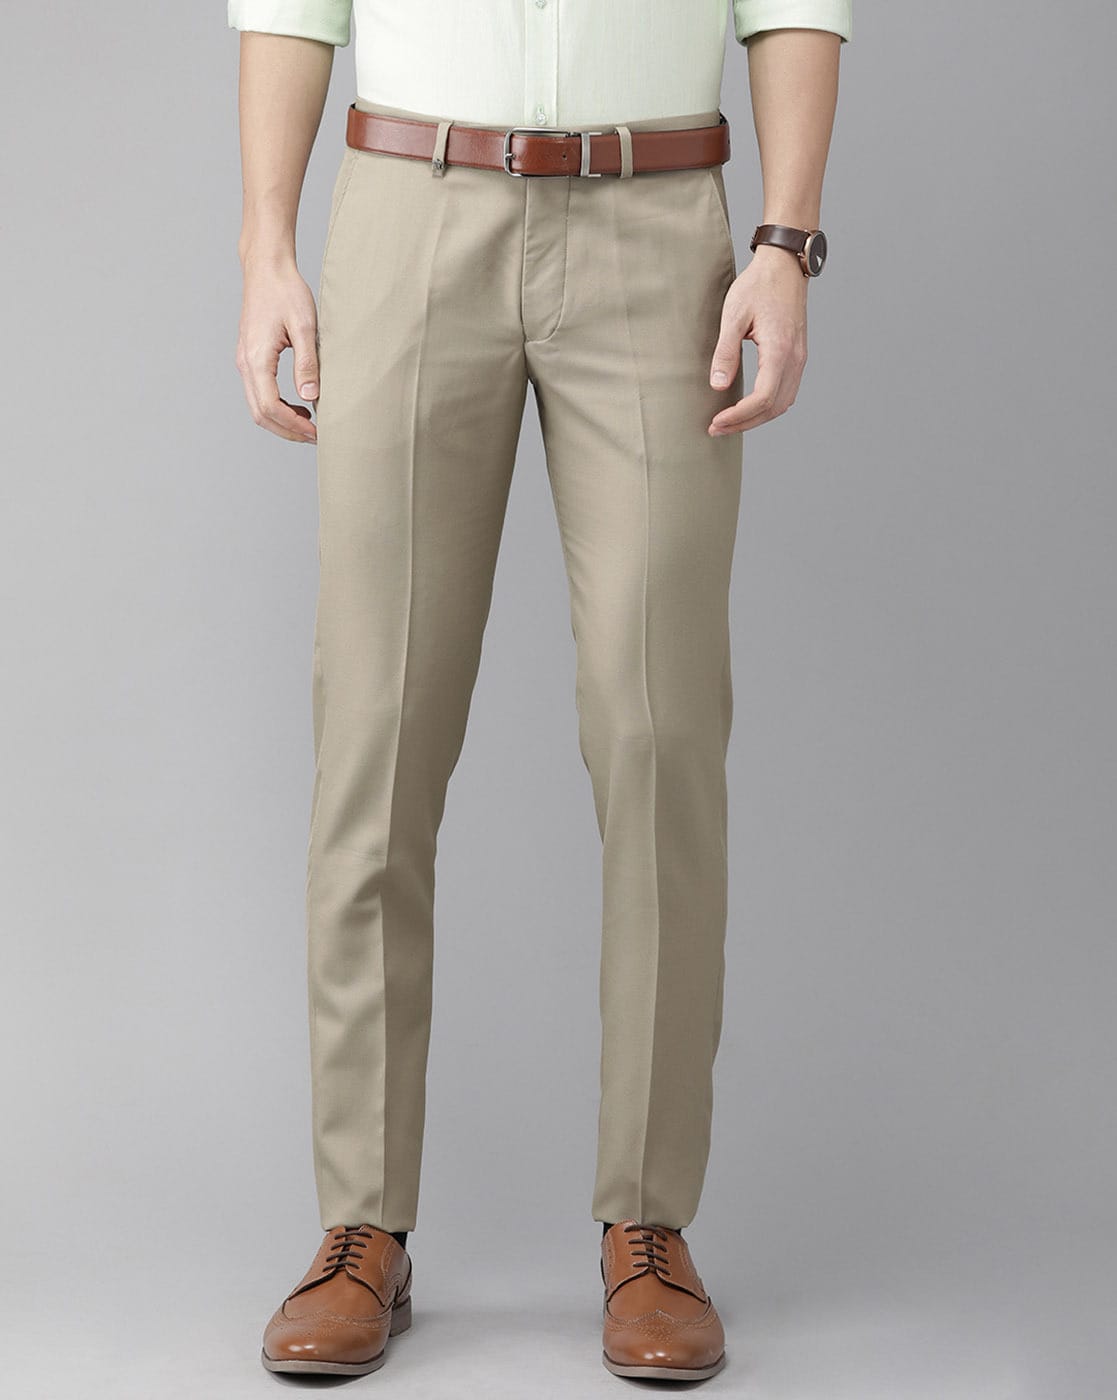 Turtle Formal Trousers  Buy Turtle Formal Trousers online in India